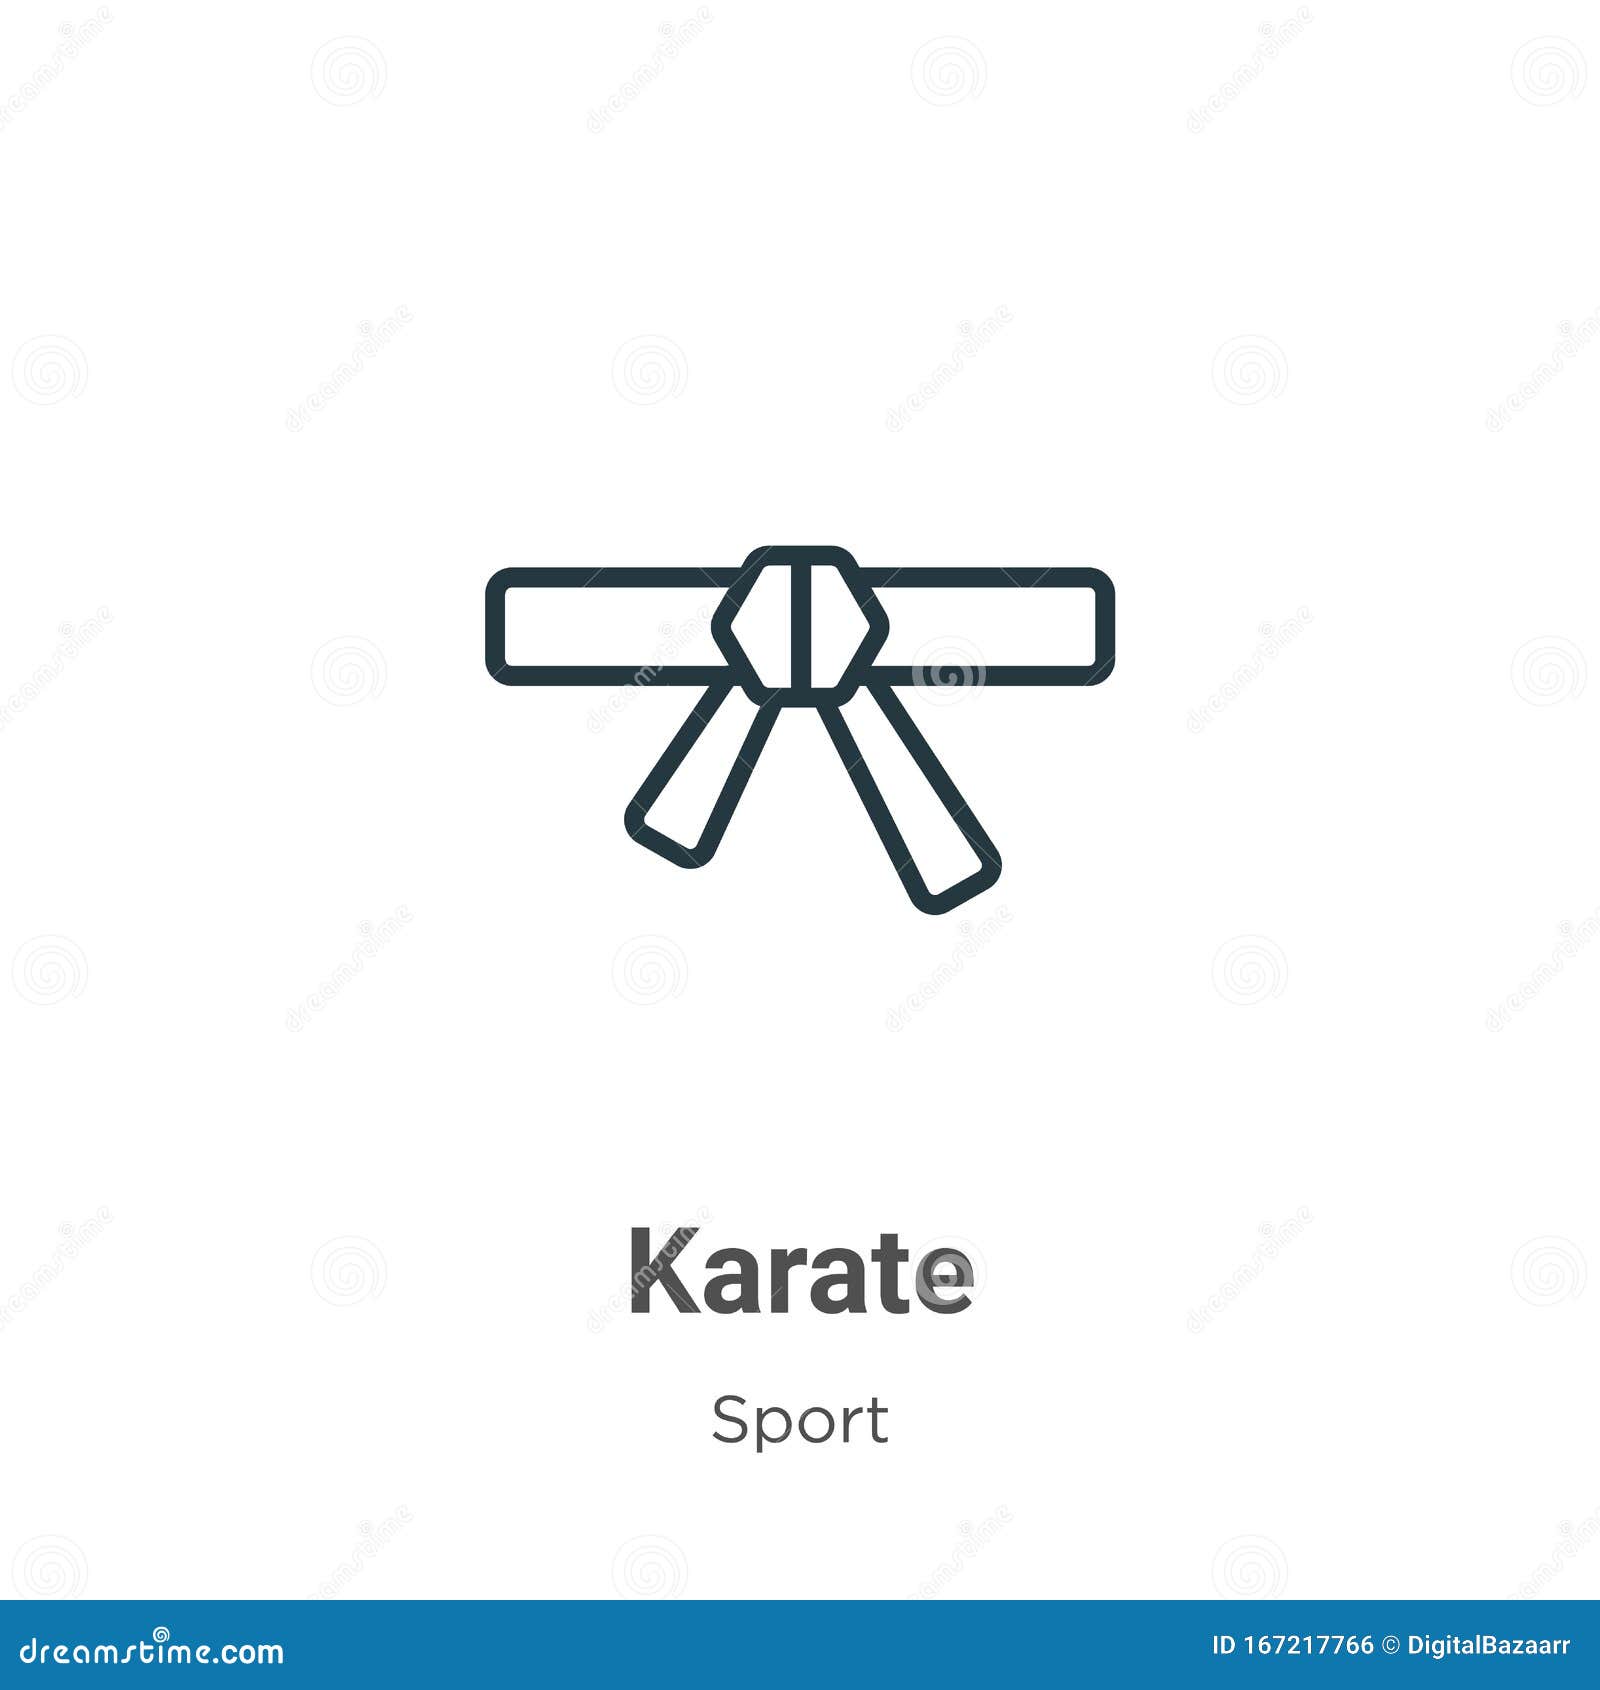 Karate Outline Vector Icon. Thin Line Black Karate Icon, Flat Vector